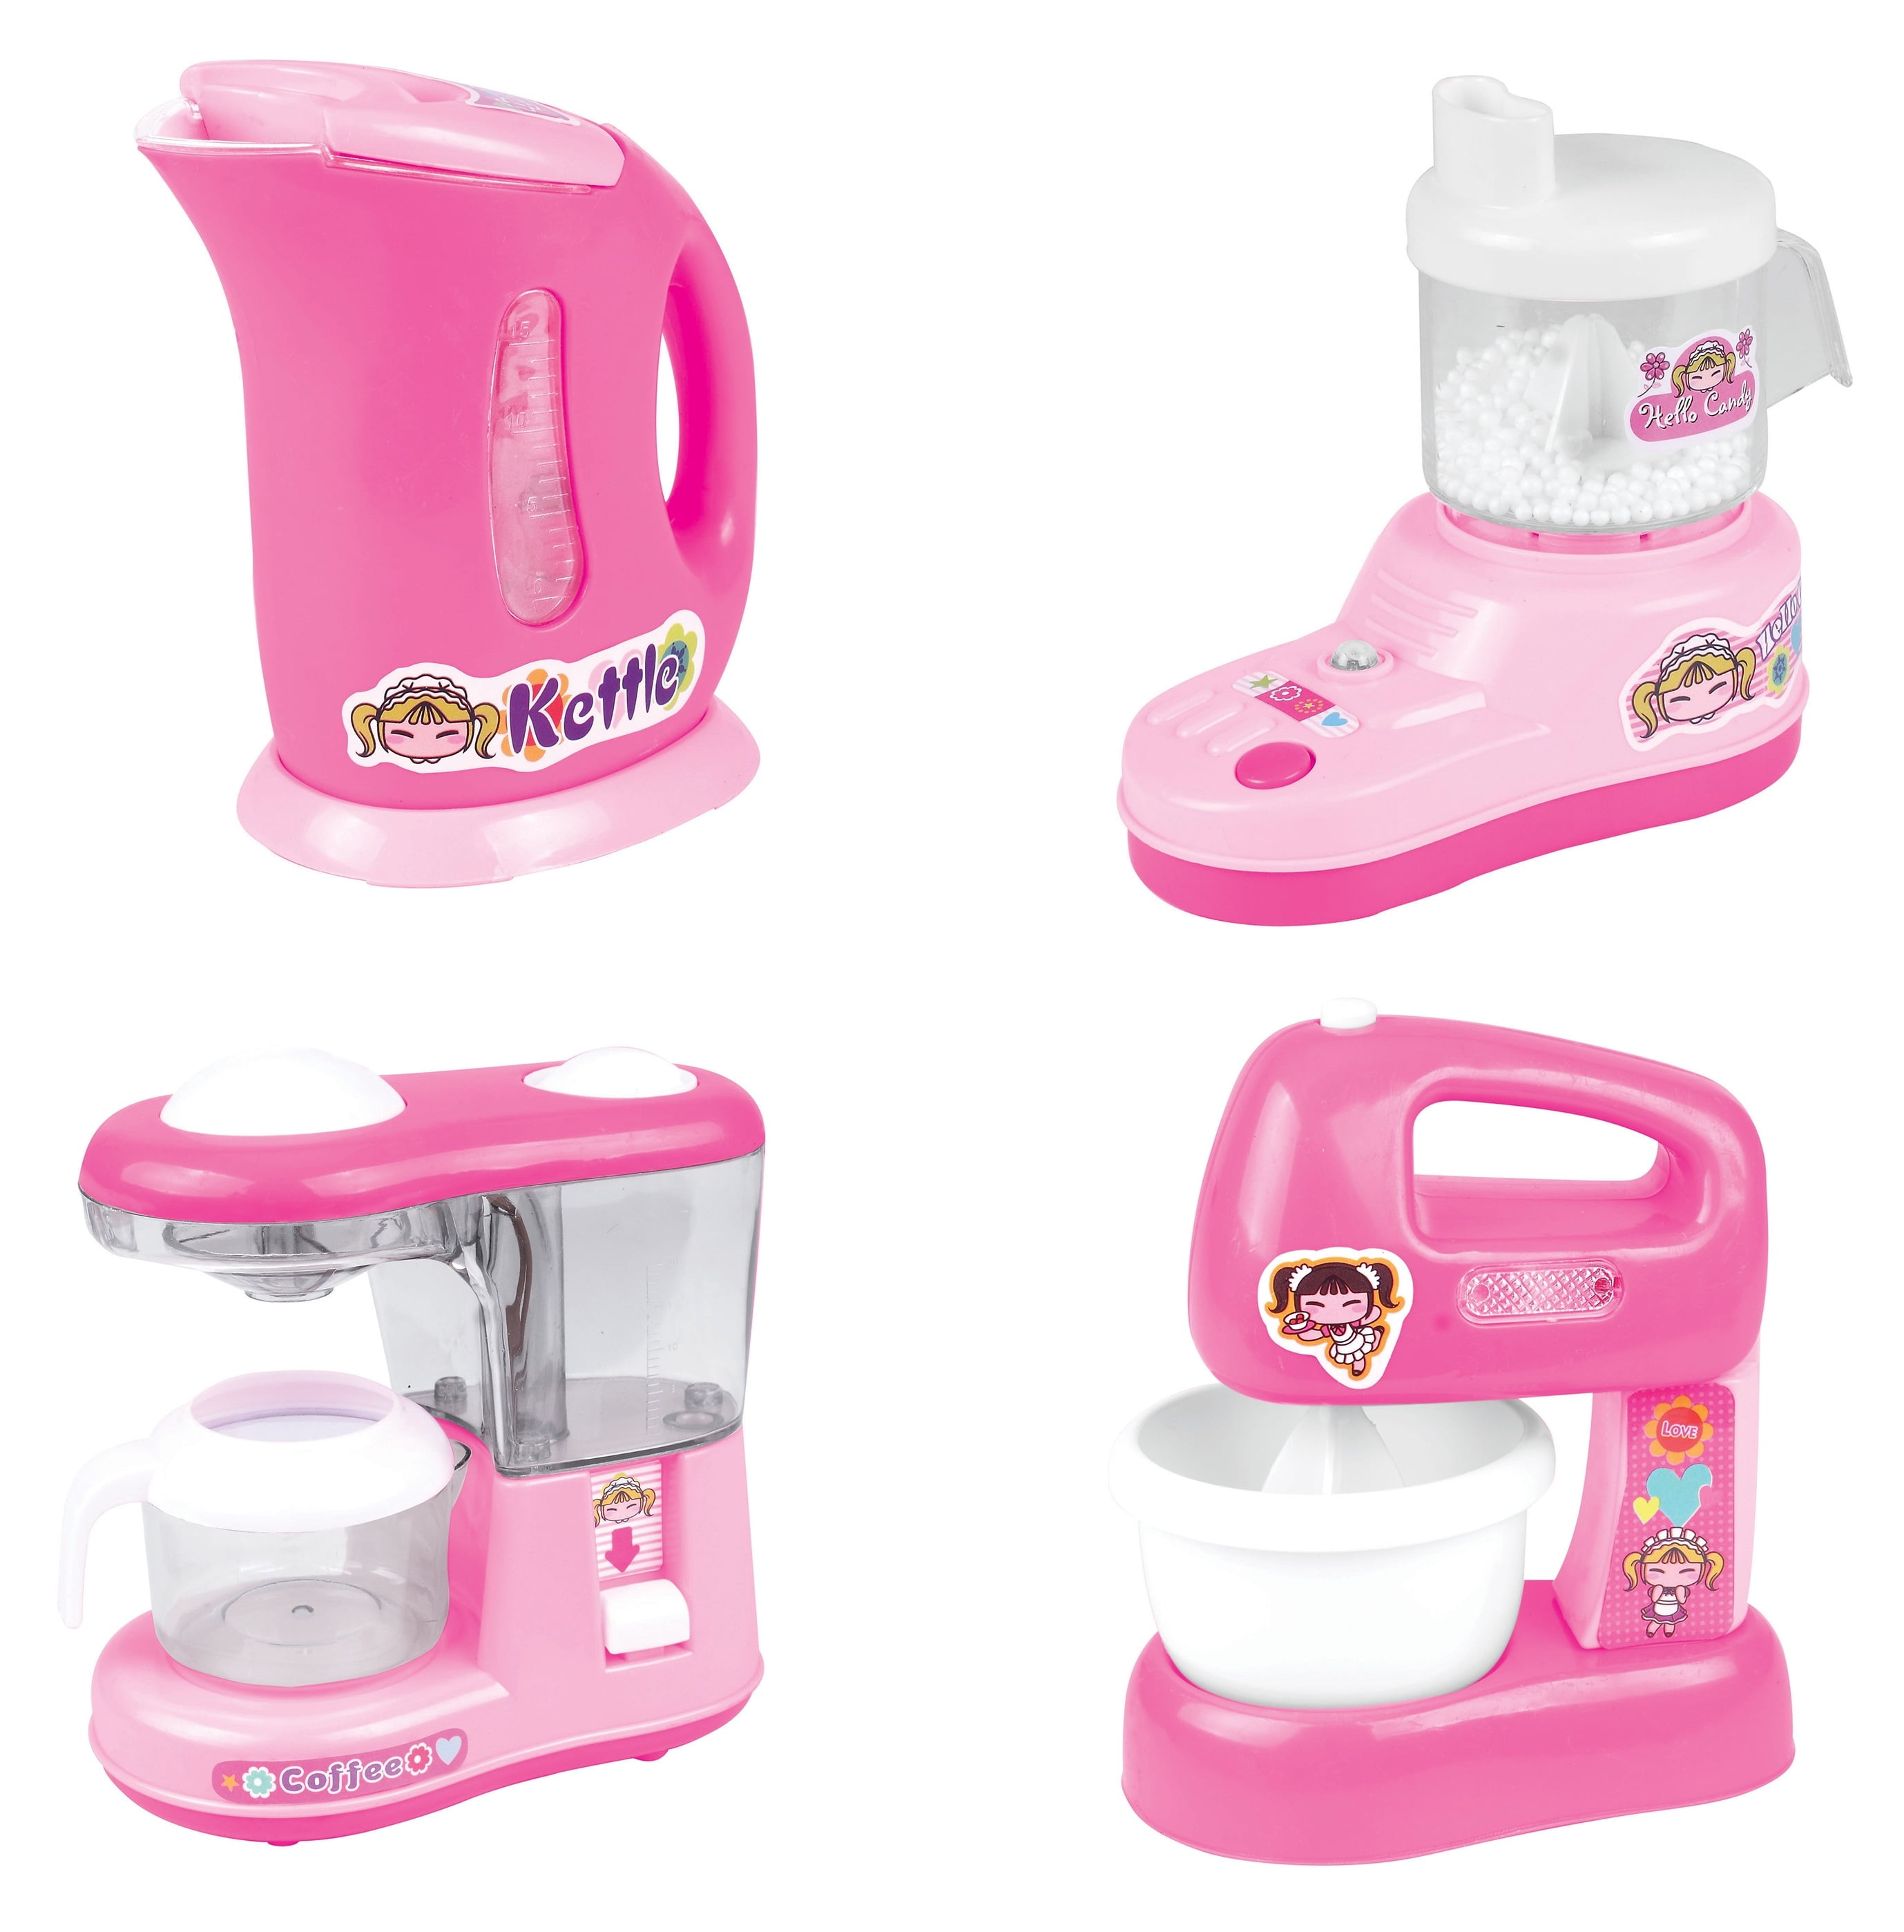 PINK CLOUR WITH LIGHT AND SOUND KITCHEN TOYS,MICRO,JUCER,BLENDER,CANDY MAKER 